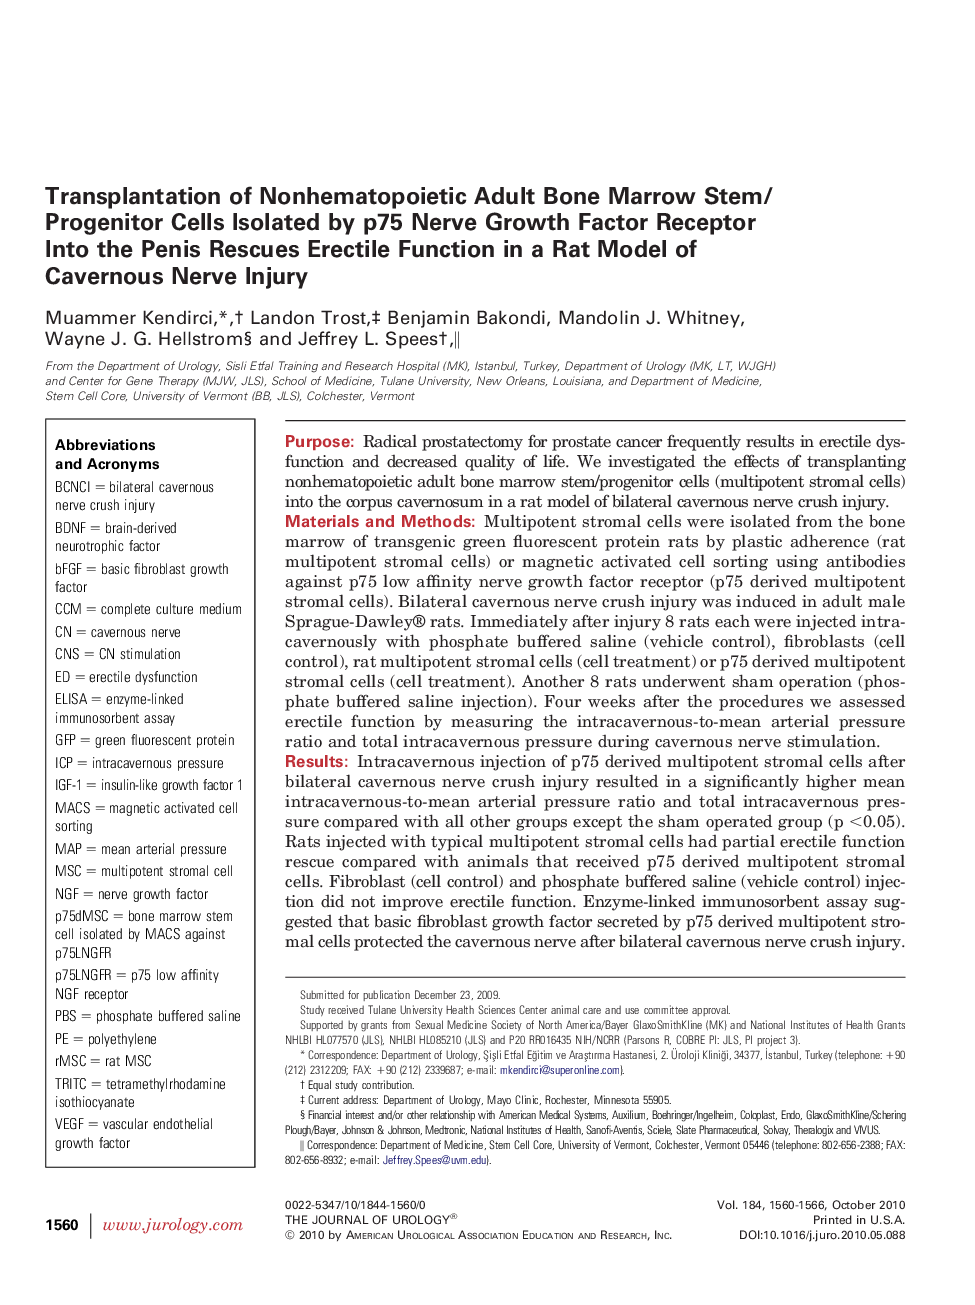 Transplantation of Nonhematopoietic Adult Bone Marrow Stem/Progenitor Cells Isolated by p75 Nerve Growth Factor Receptor Into the Penis Rescues Erectile Function in a Rat Model of Cavernous Nerve Injury